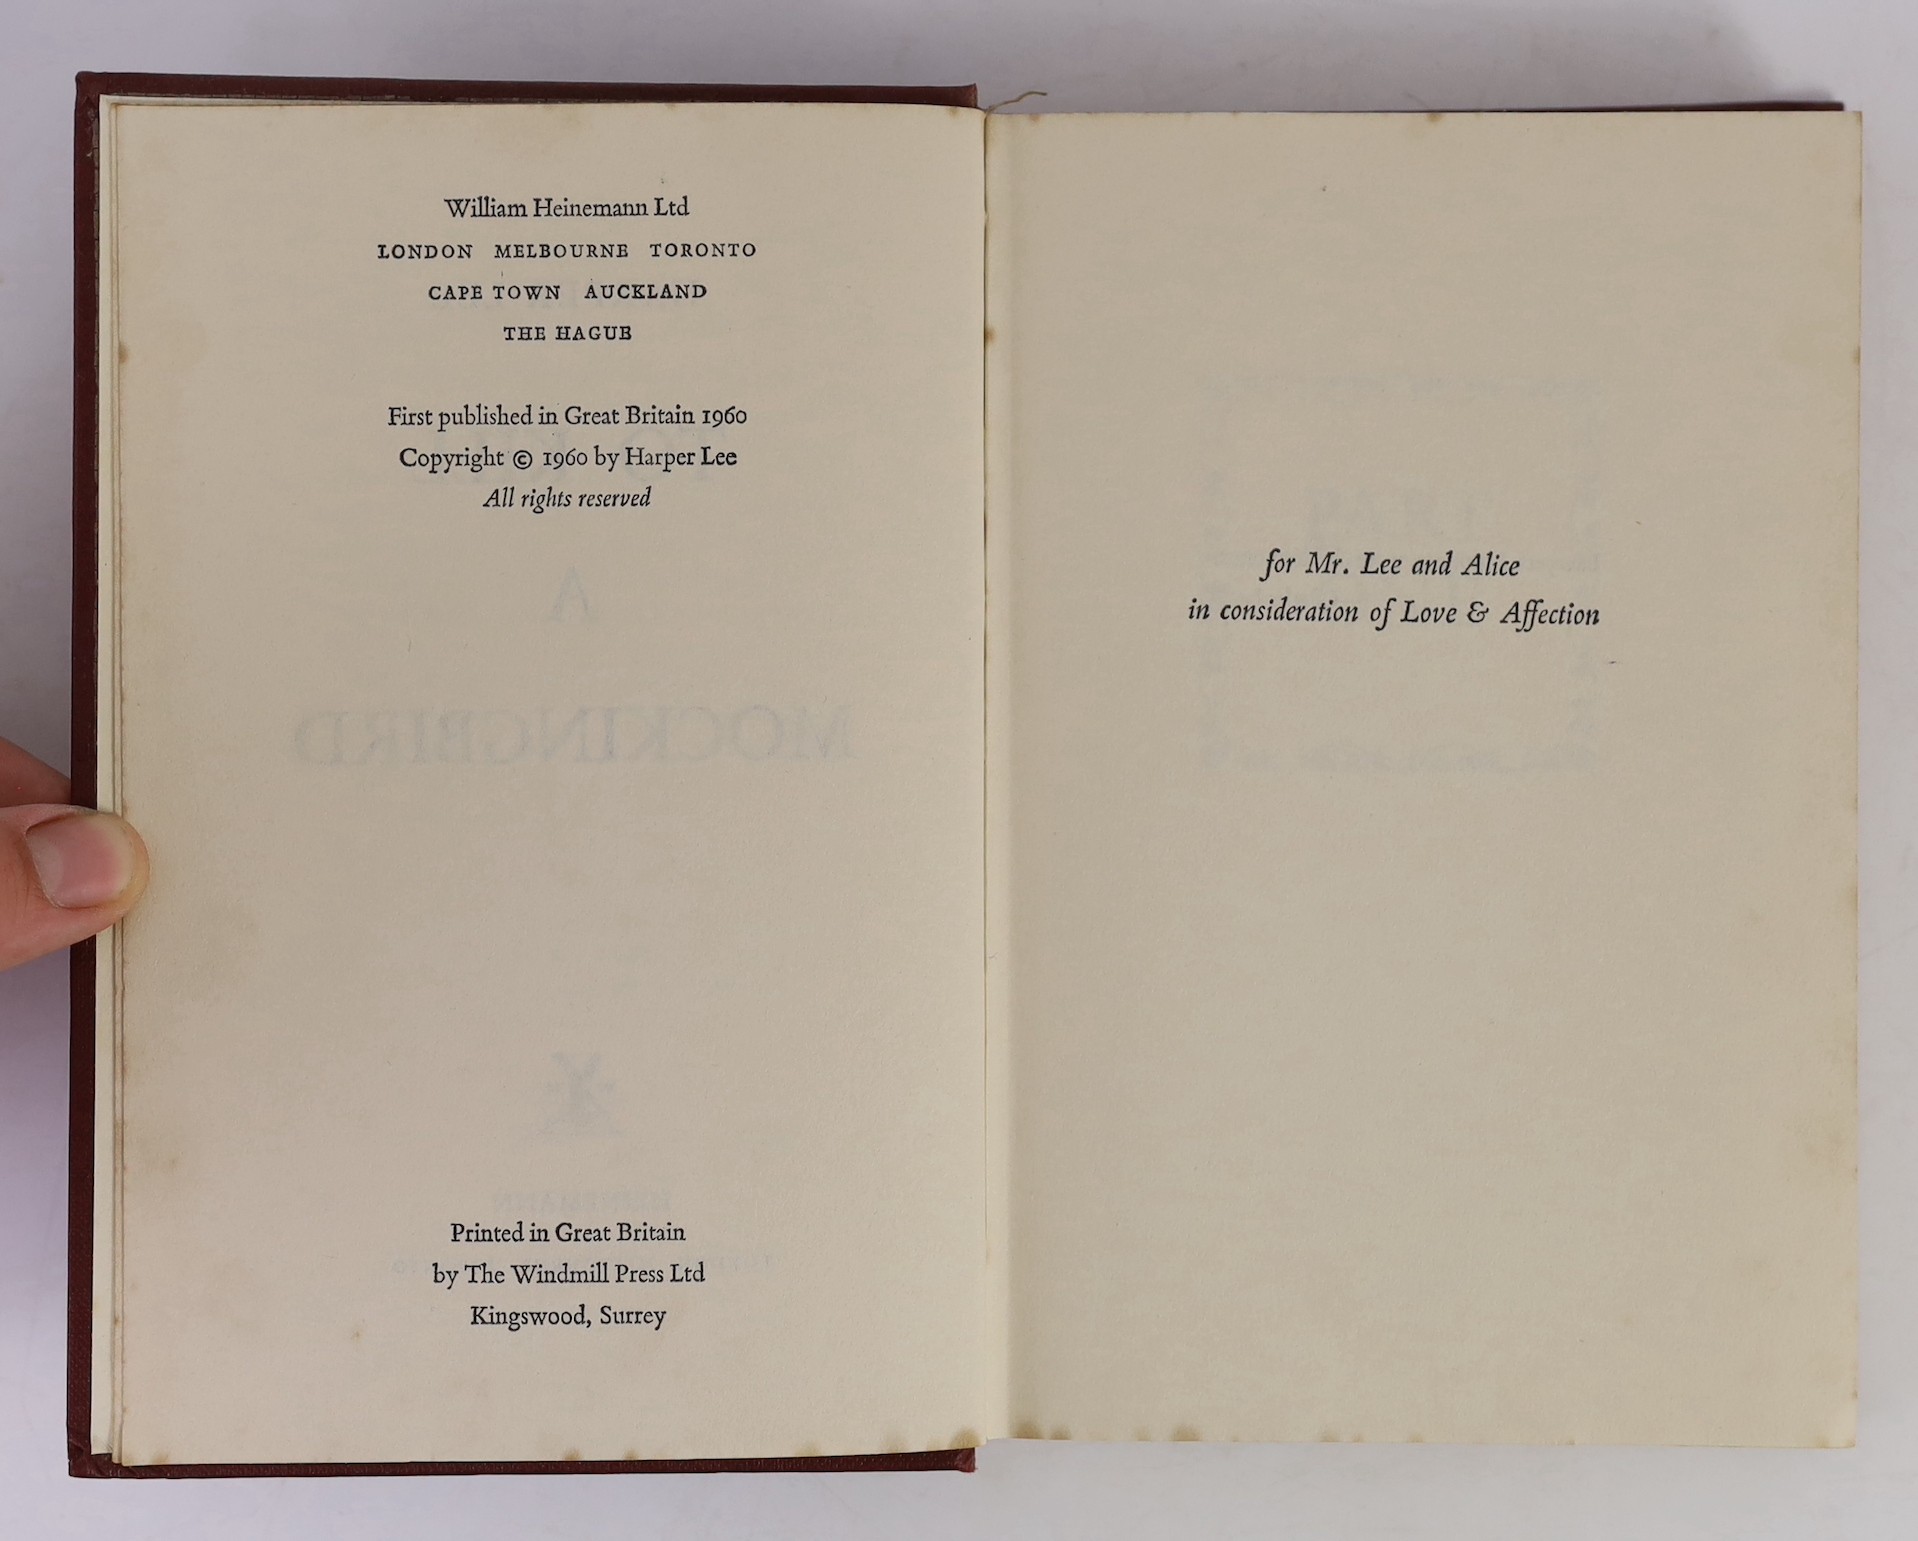 Lee, Harper - To Kill a Mockingbird, 1st English edition, 8vo, cloth in clipped d/j, ownership inscription to front fly leaf, William Heinemann, London, 1960